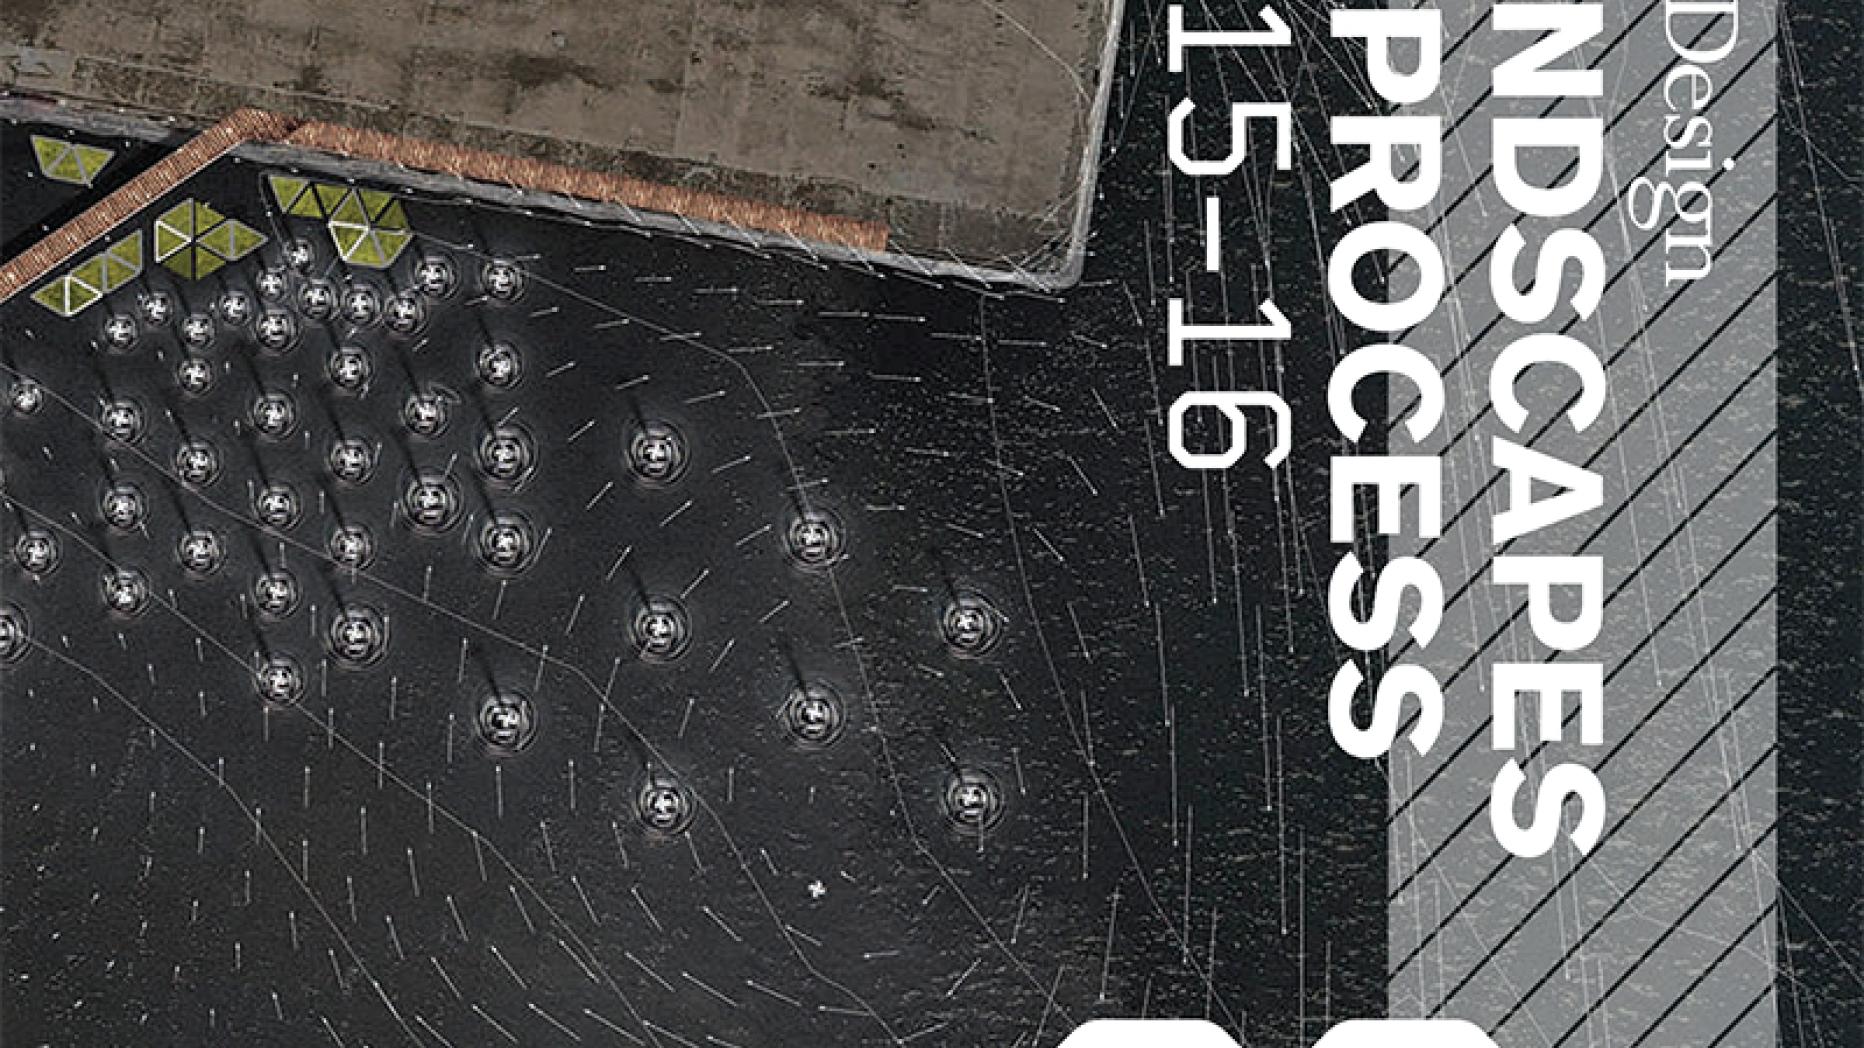 Cover for publication, "Landscapes in Process" edition 20. 2015-16